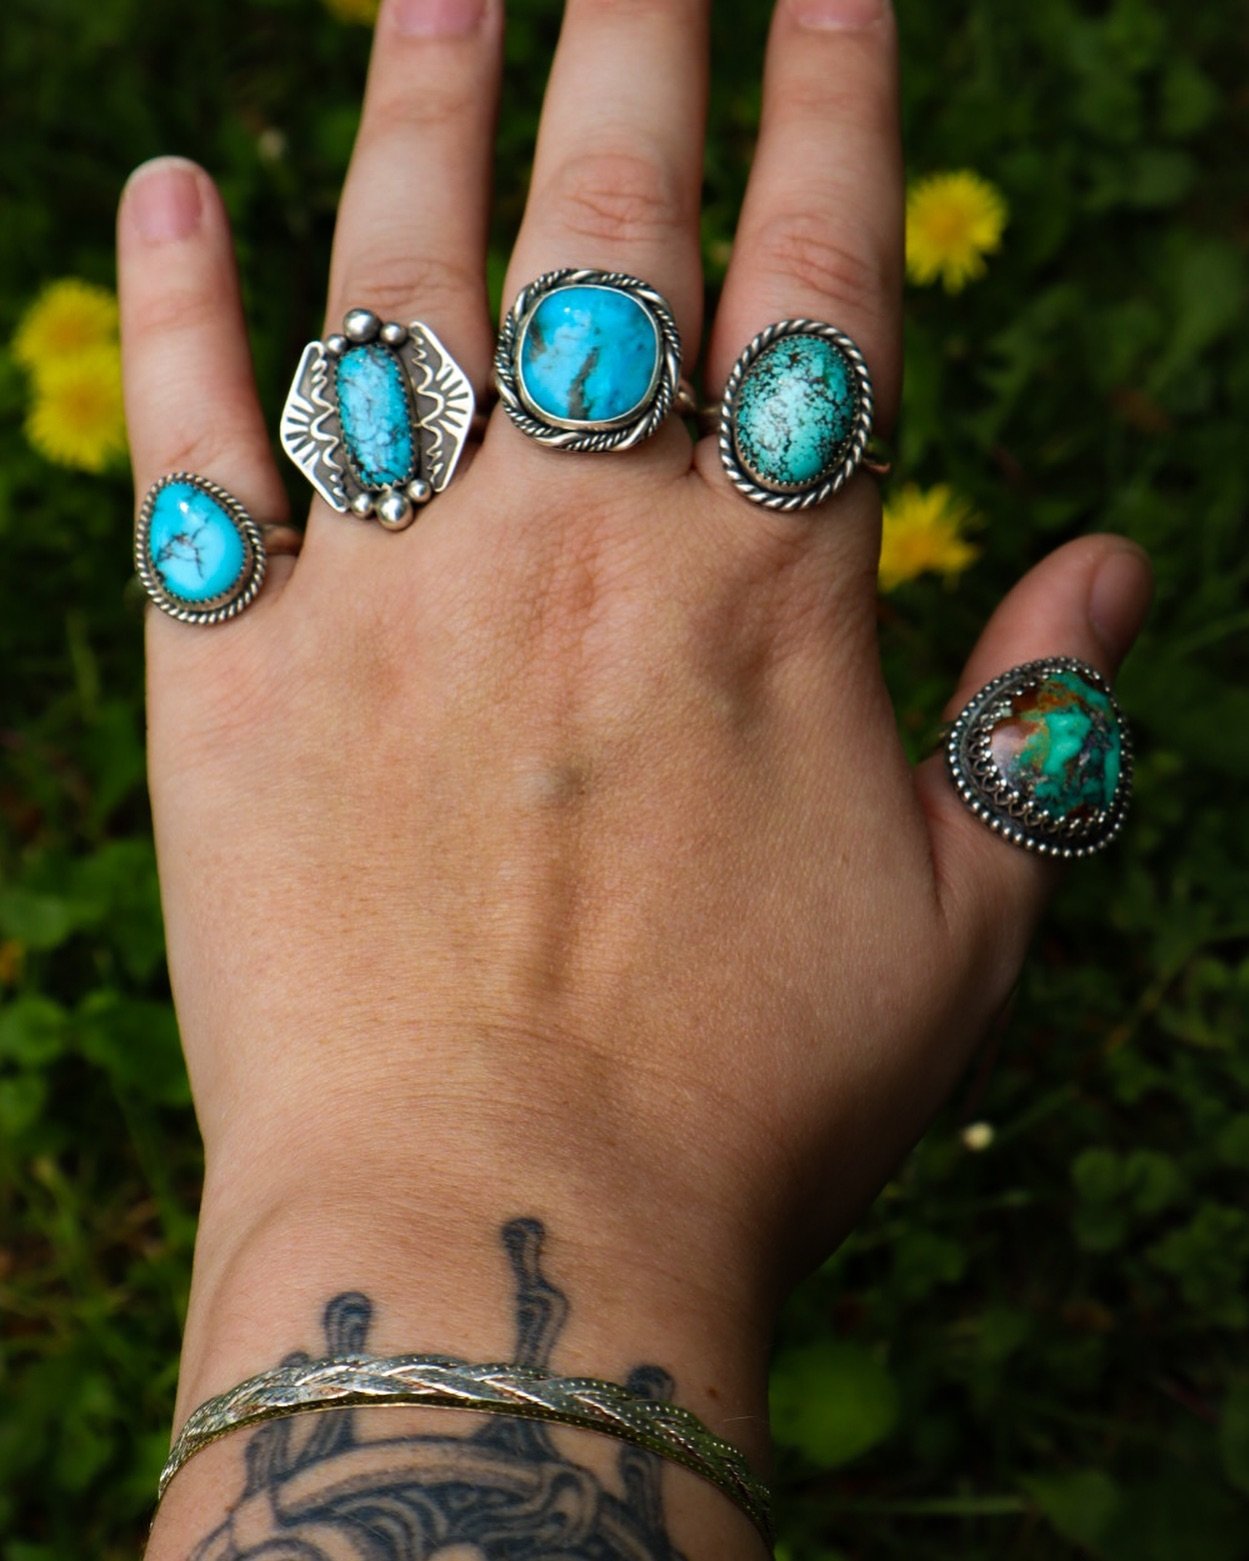 Looking for the perfect turquoise ring for your jewelry collection this summer? LOOK NO FURTHER - I will have all of these rings with me at the @yallmartsc Spring Shindig TOMORROW at @artbarsc from 1-5! These are also available on the website for fol